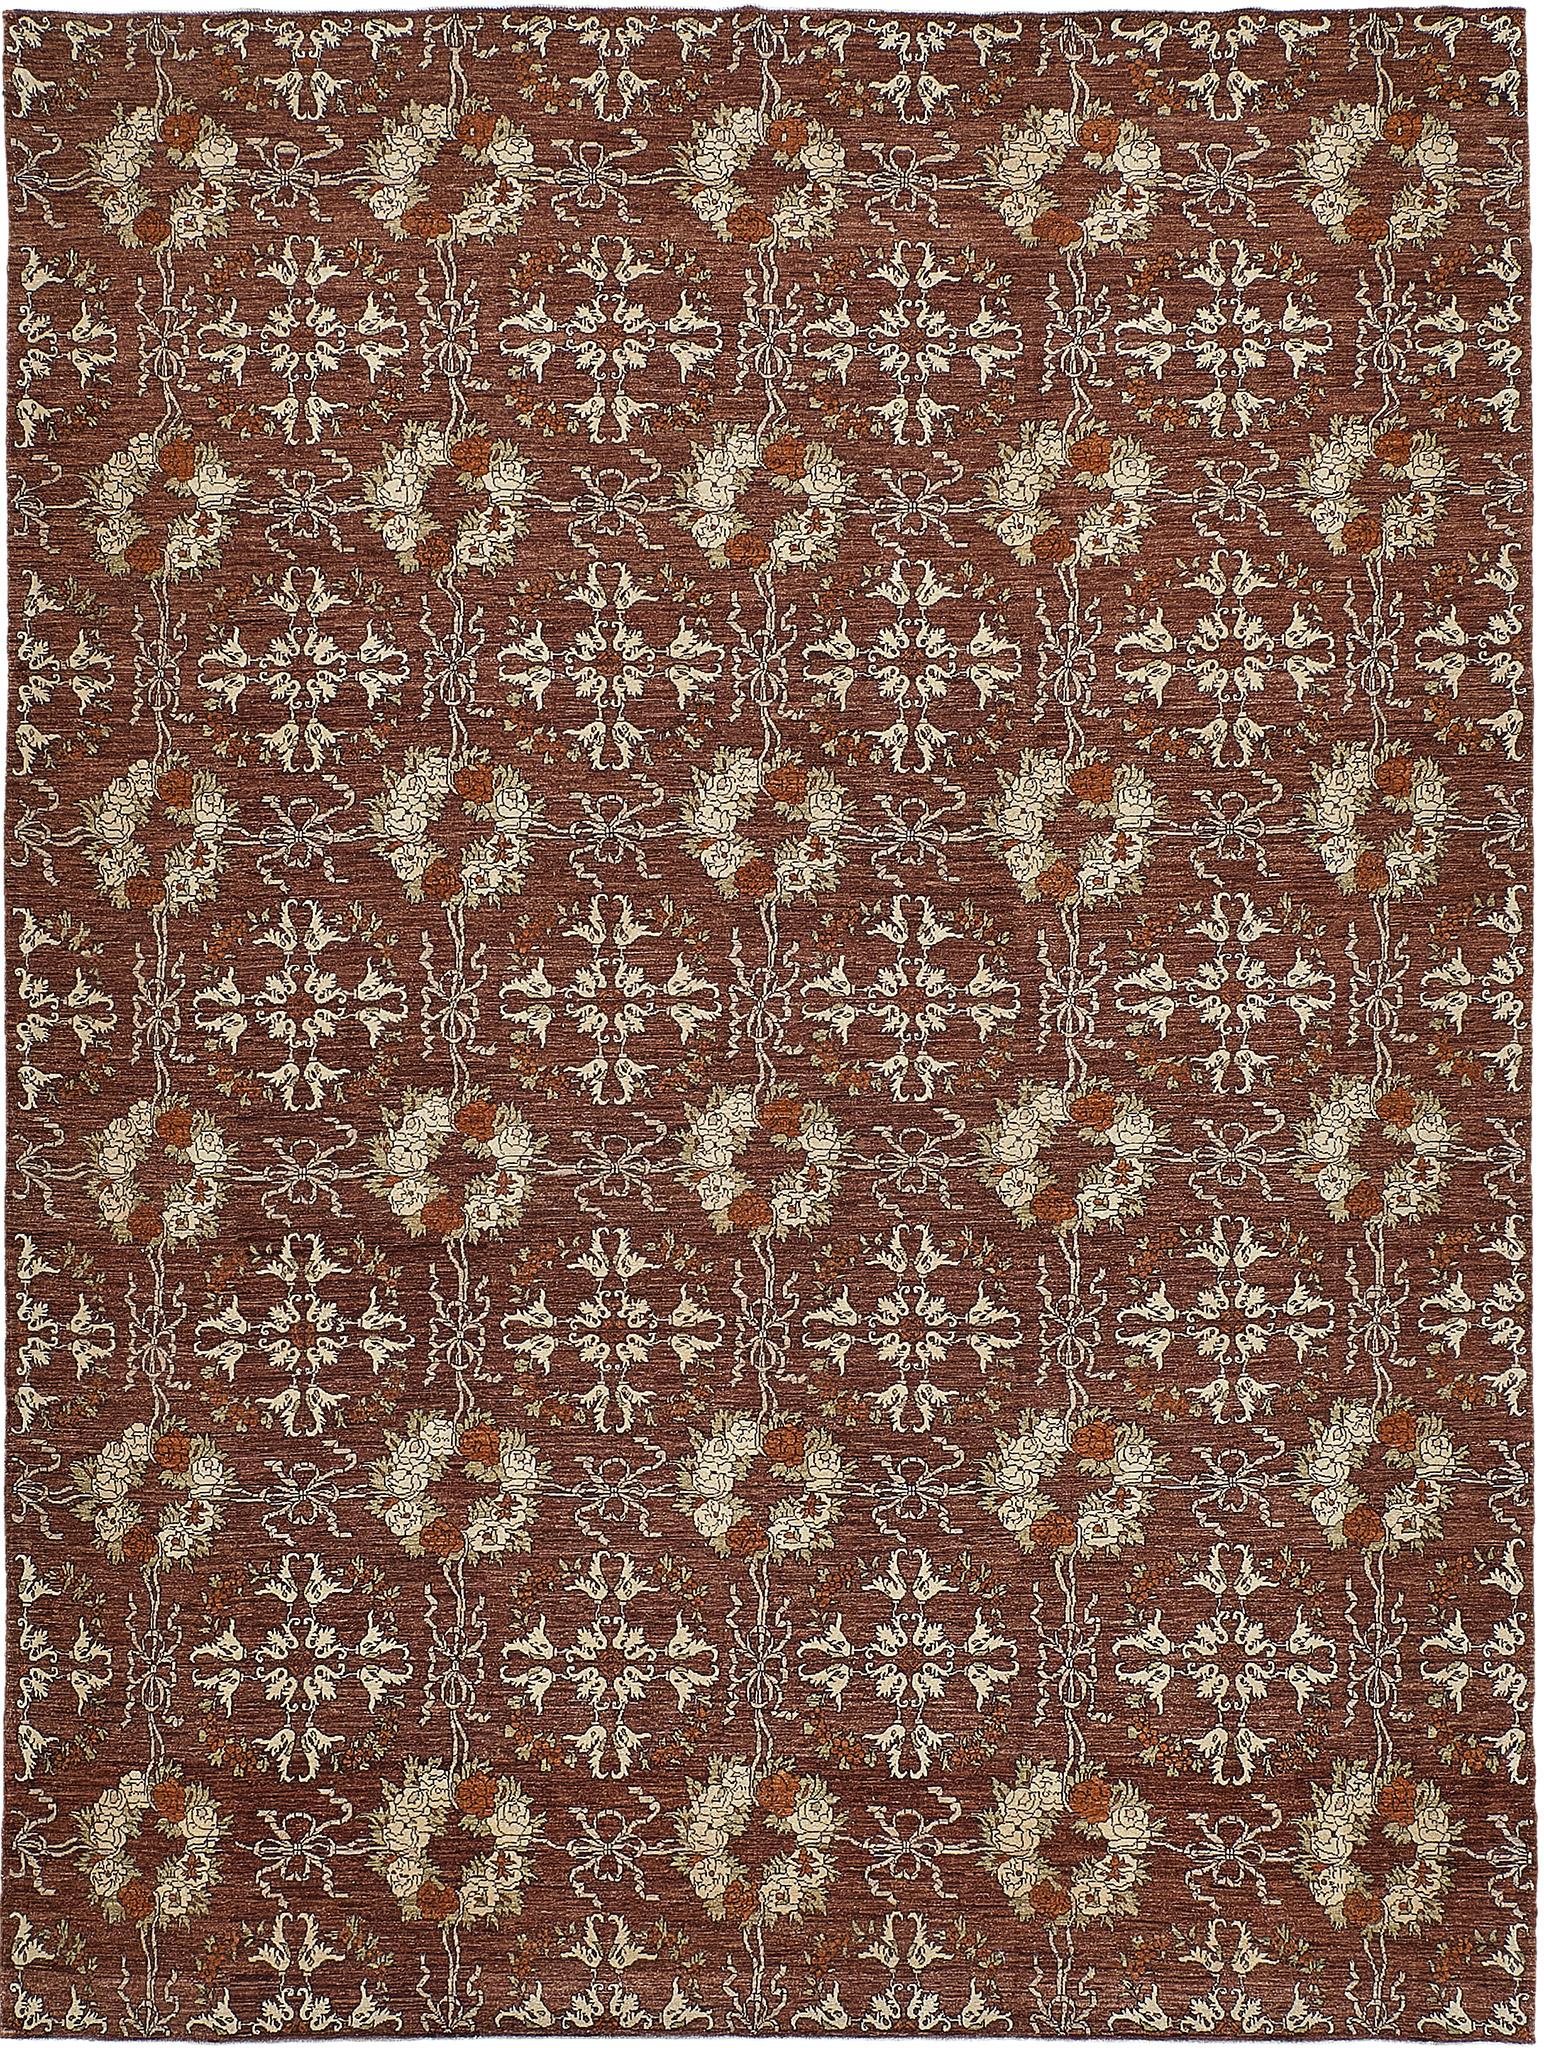 This enchanting rug that is made of hand spun wool and natural dye features an elegant cluster of roses intertwined by gracefully knotted vines in a reddish-brown sepia field. It gracefully displays garden of stylized blooms which exudes the sense